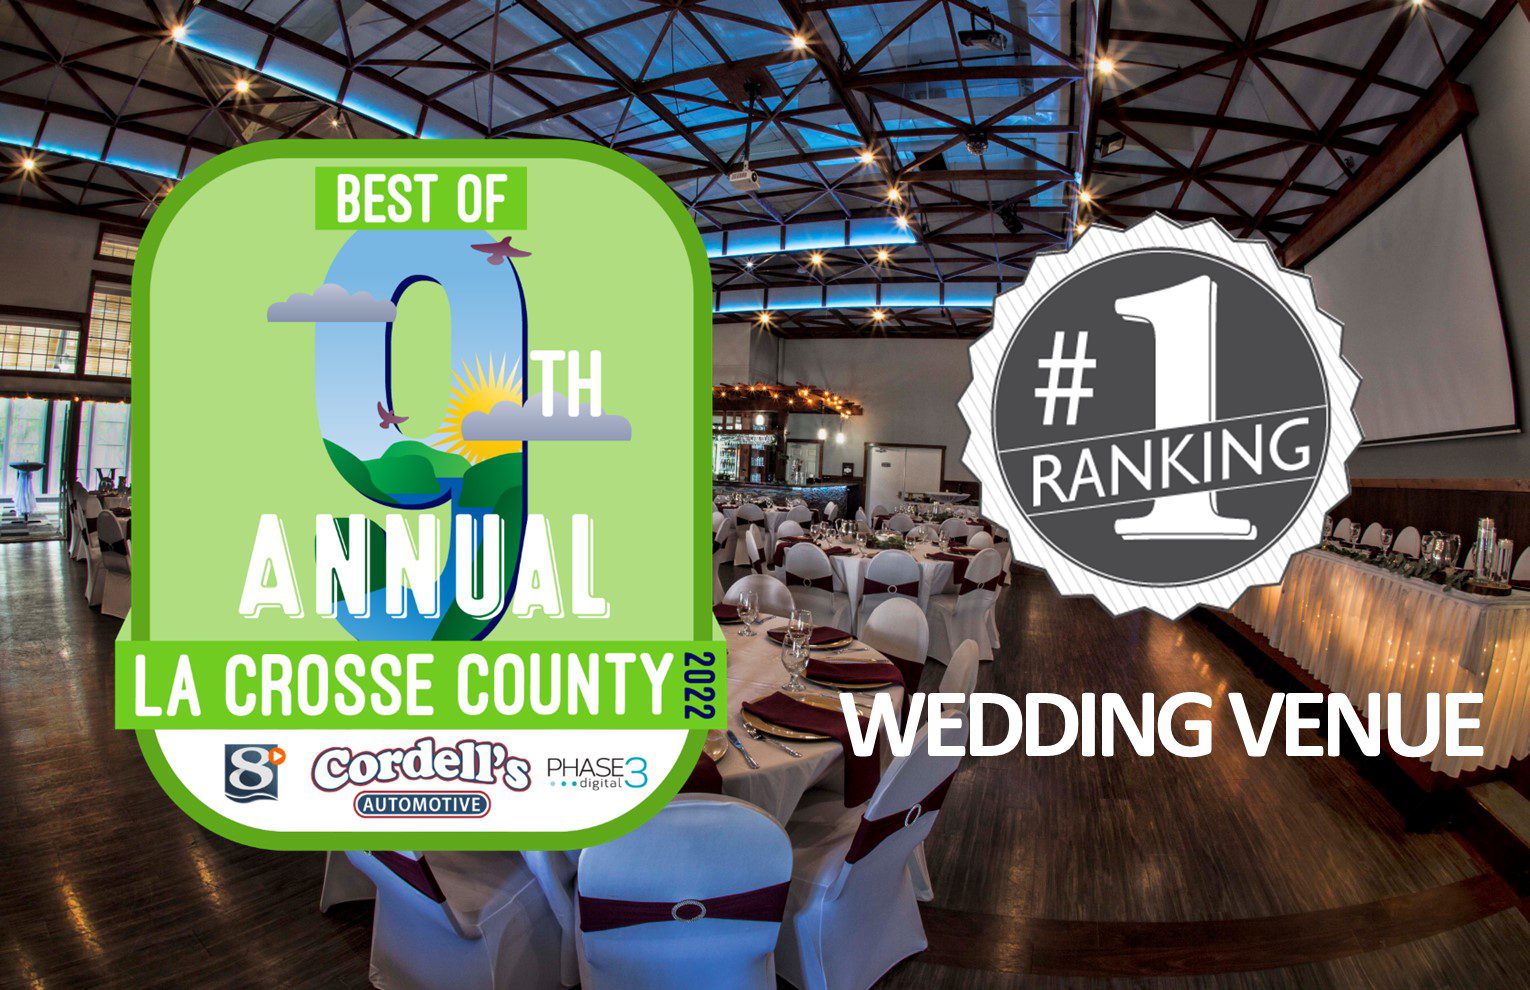 A wedding venue with the best of 1 0 th annual grosse county